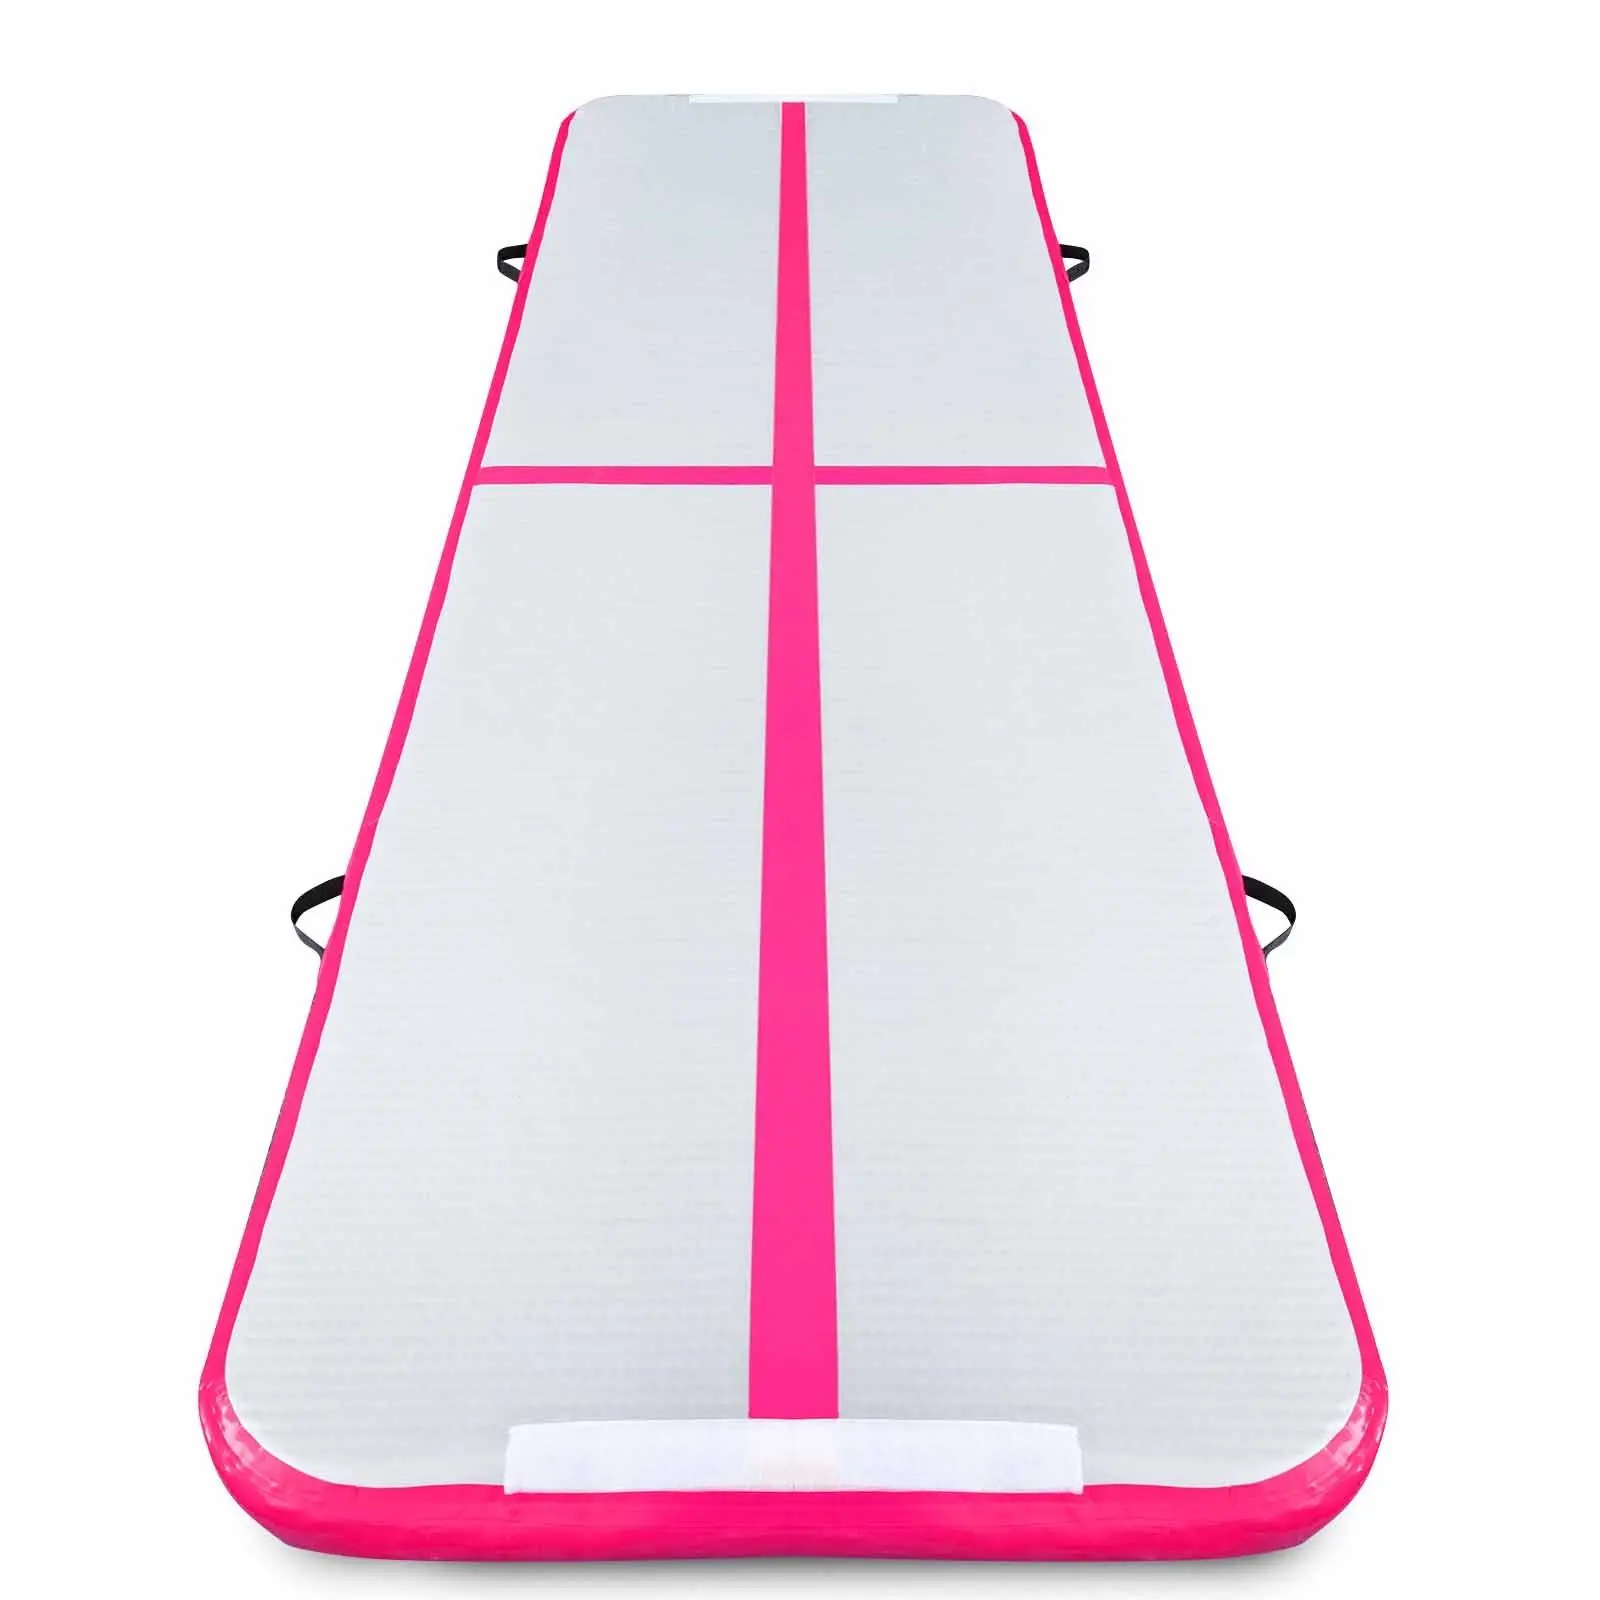 

Factory Inflatable Thumbling Gymnatic Mats Gymnastic Training Used Air Tracks For Sale, Pink